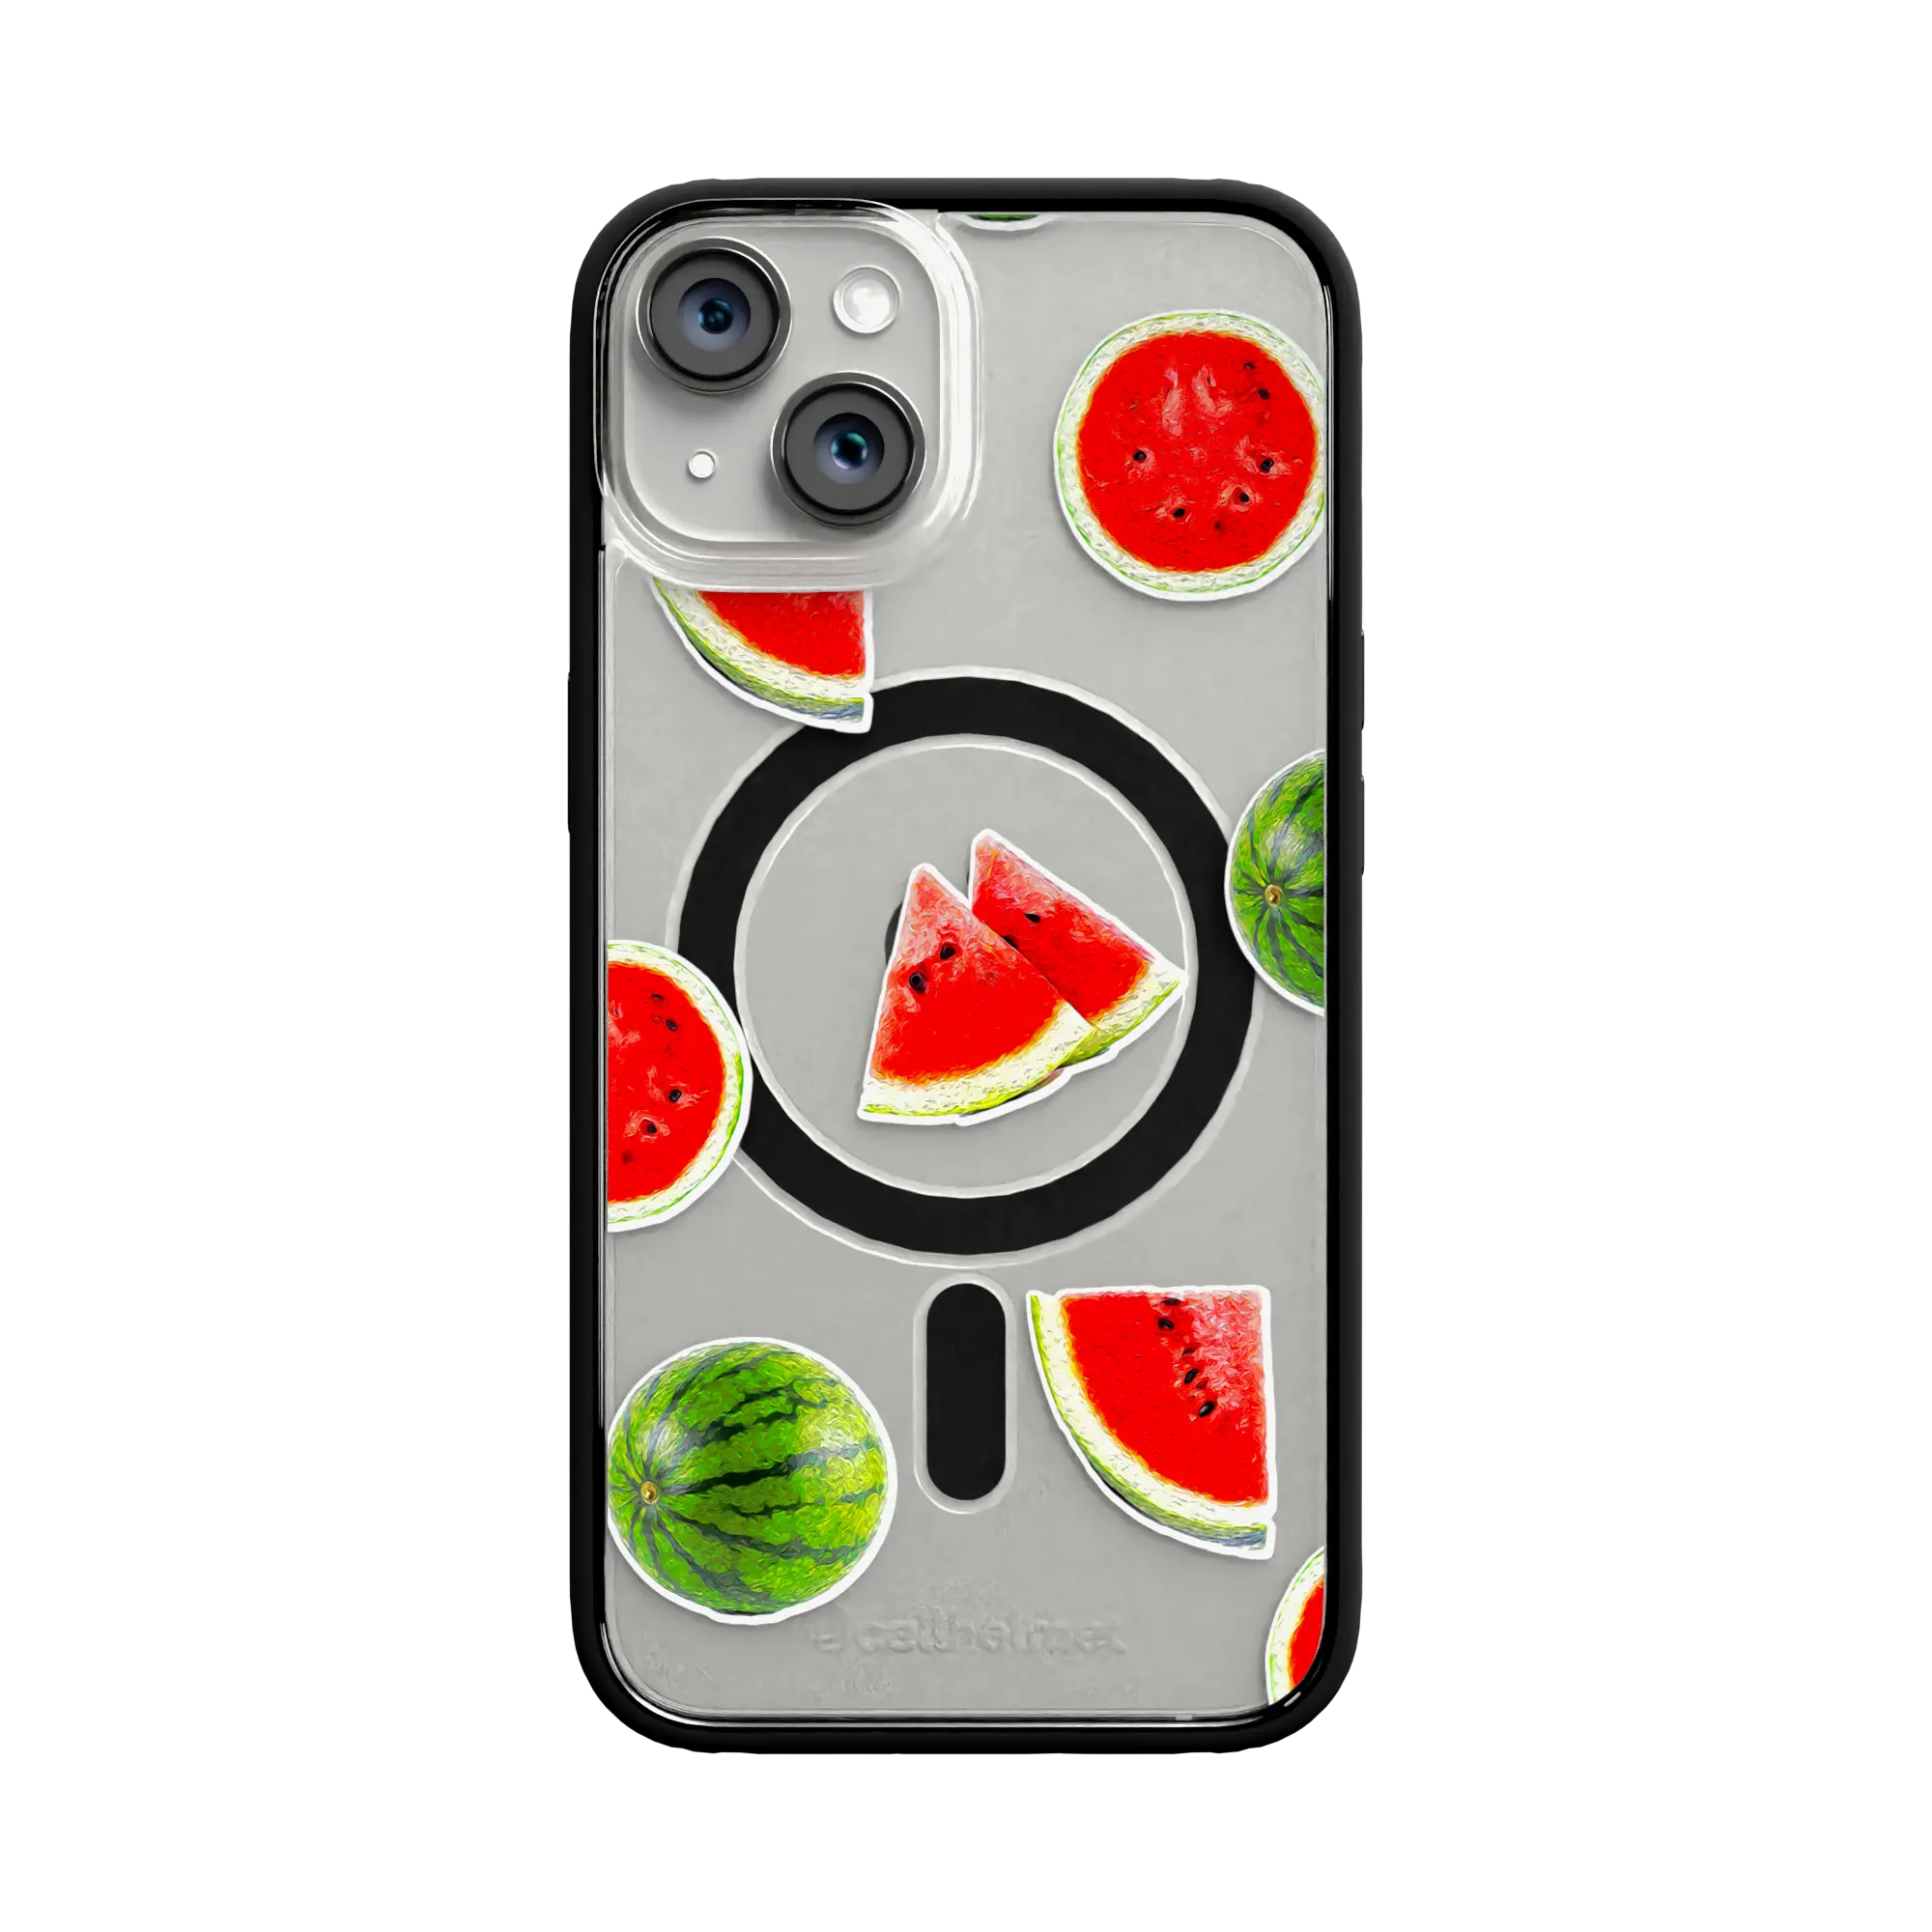 Apple-iPhone-12-12-Pro-Crystal-Clear Watermelon Burst | Protective MagSafe Case | Fruits Collection for Apple iPhone 12 Series cellhelmet cellhelmet